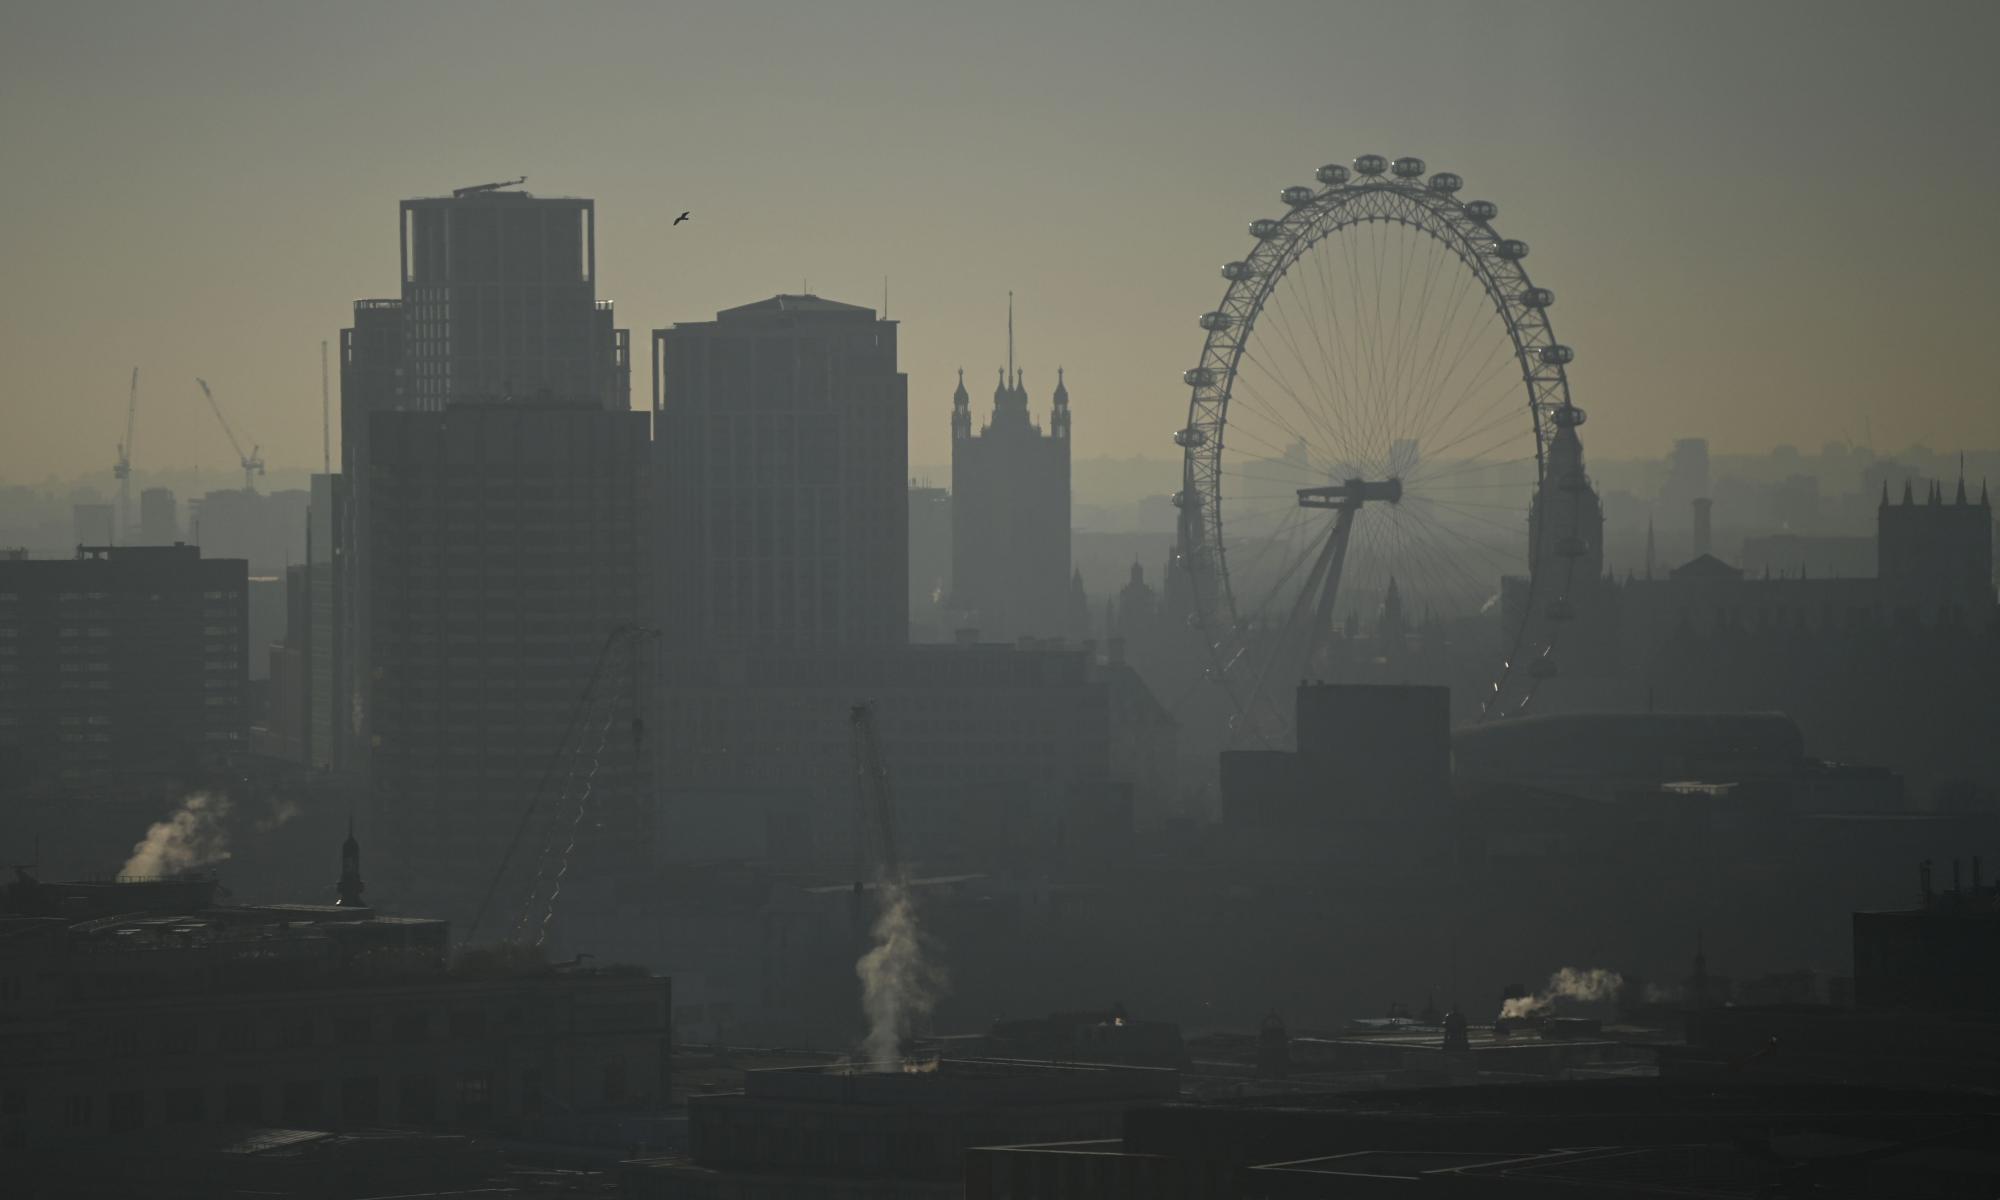 Tell motorists to help tackle London’s toxic air peaks, authorities urged